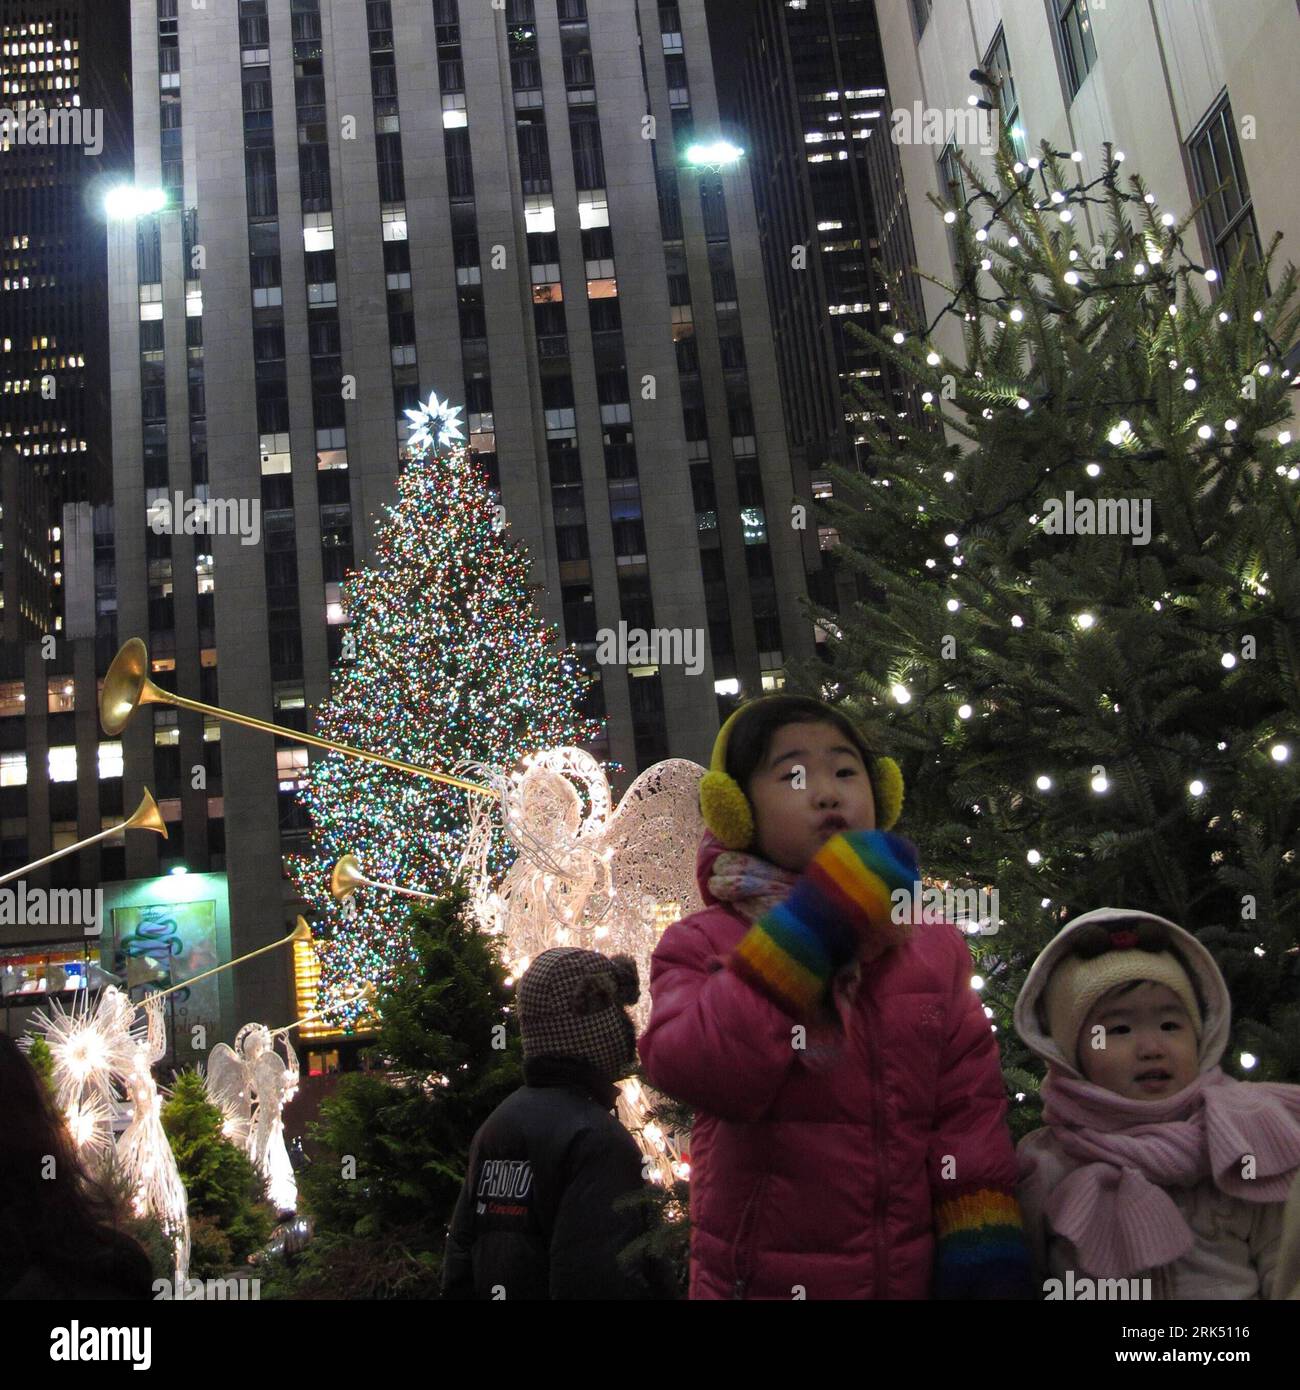 Where to find 14 of New York City's festive Christmas trees